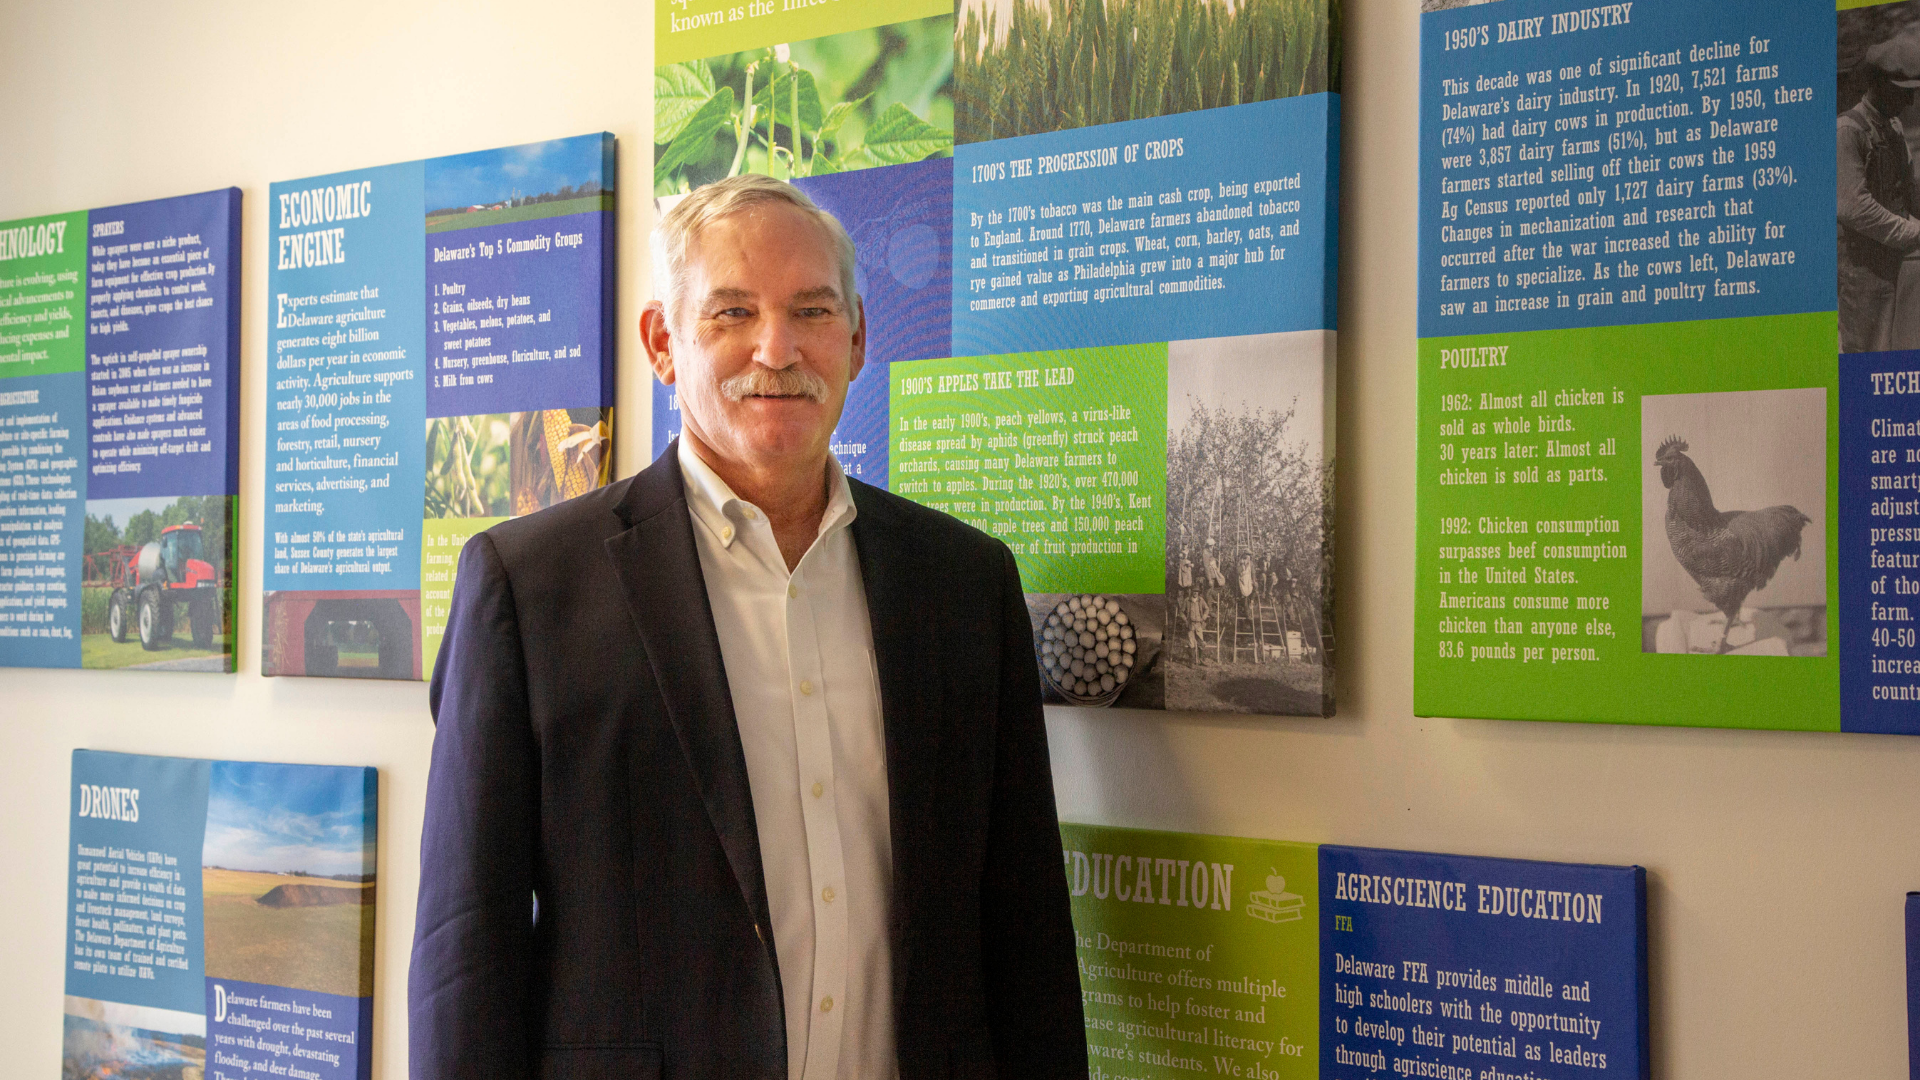 Delaware Secretary of Agriculture Michael T. Scuse stands in the agency lobby in front of colorful panels related to the history of Delaware agriculture.